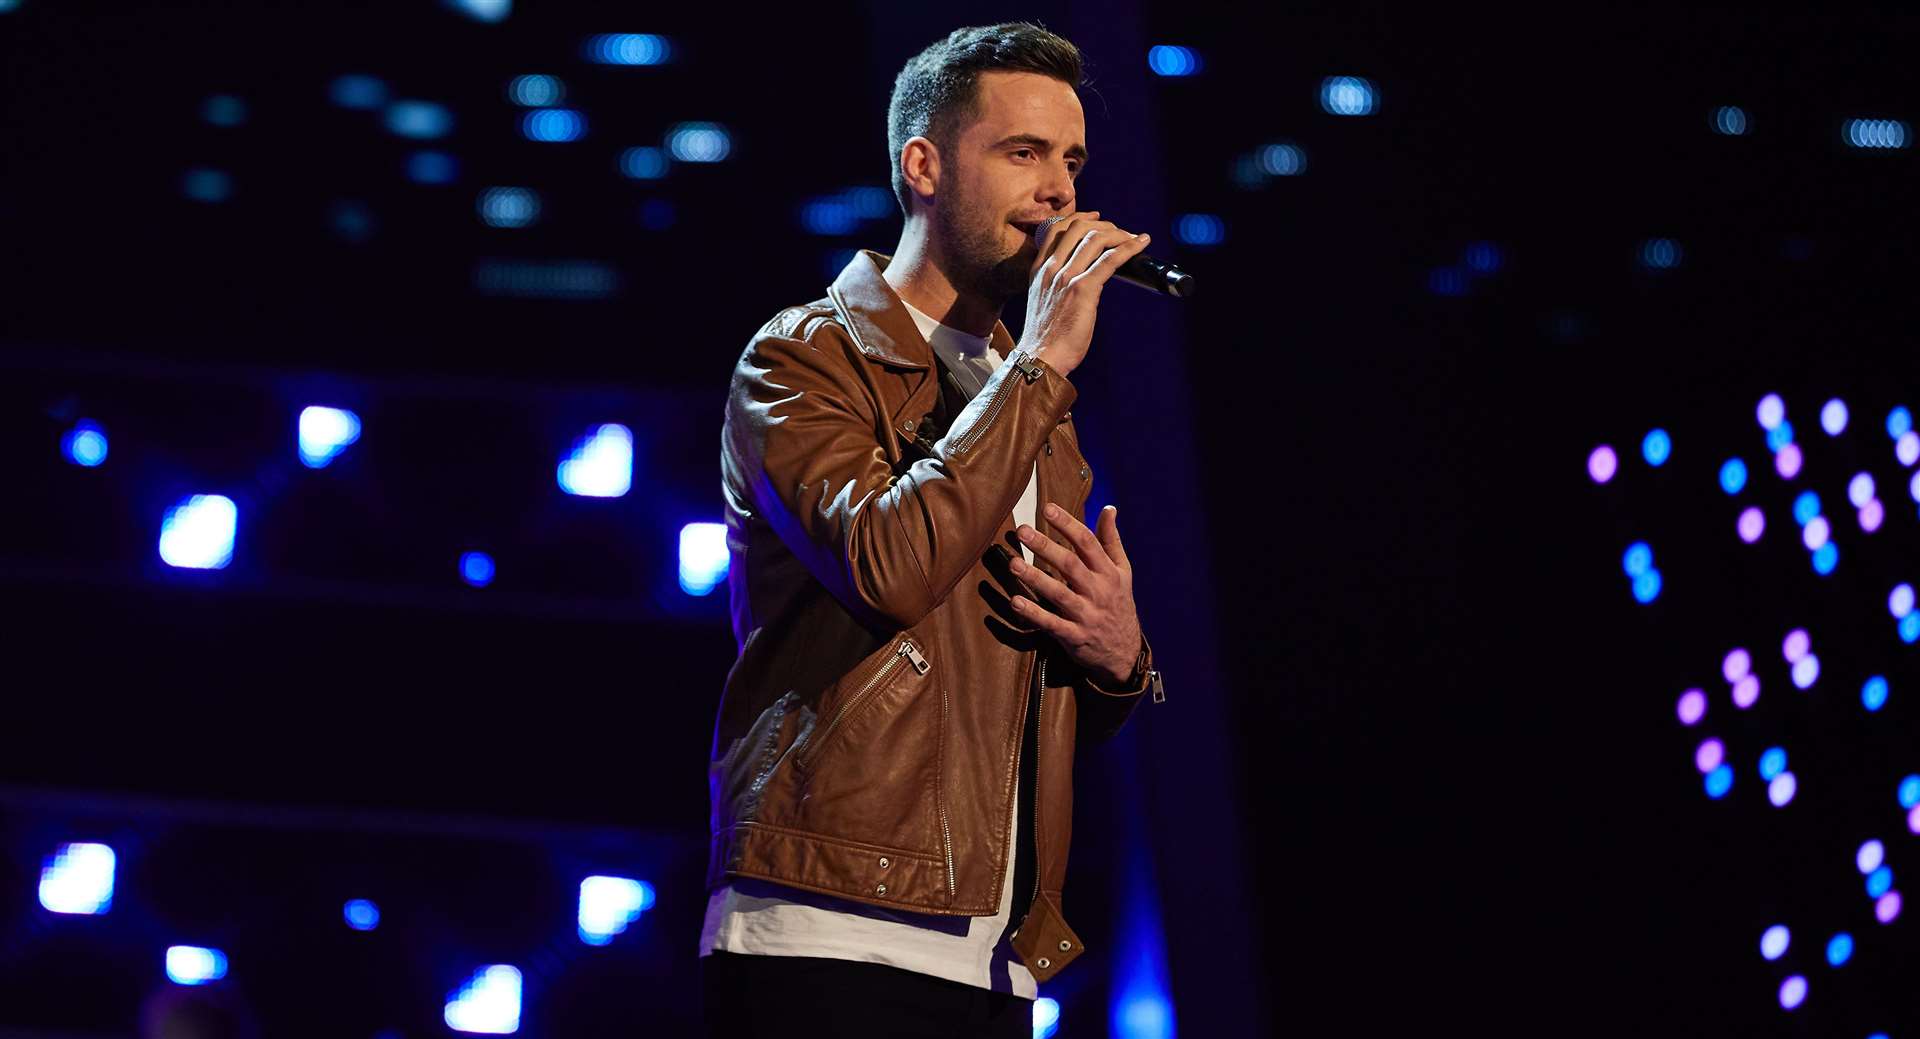 Andrew won the competitions battle round. Picture: ITV's The Voice UK